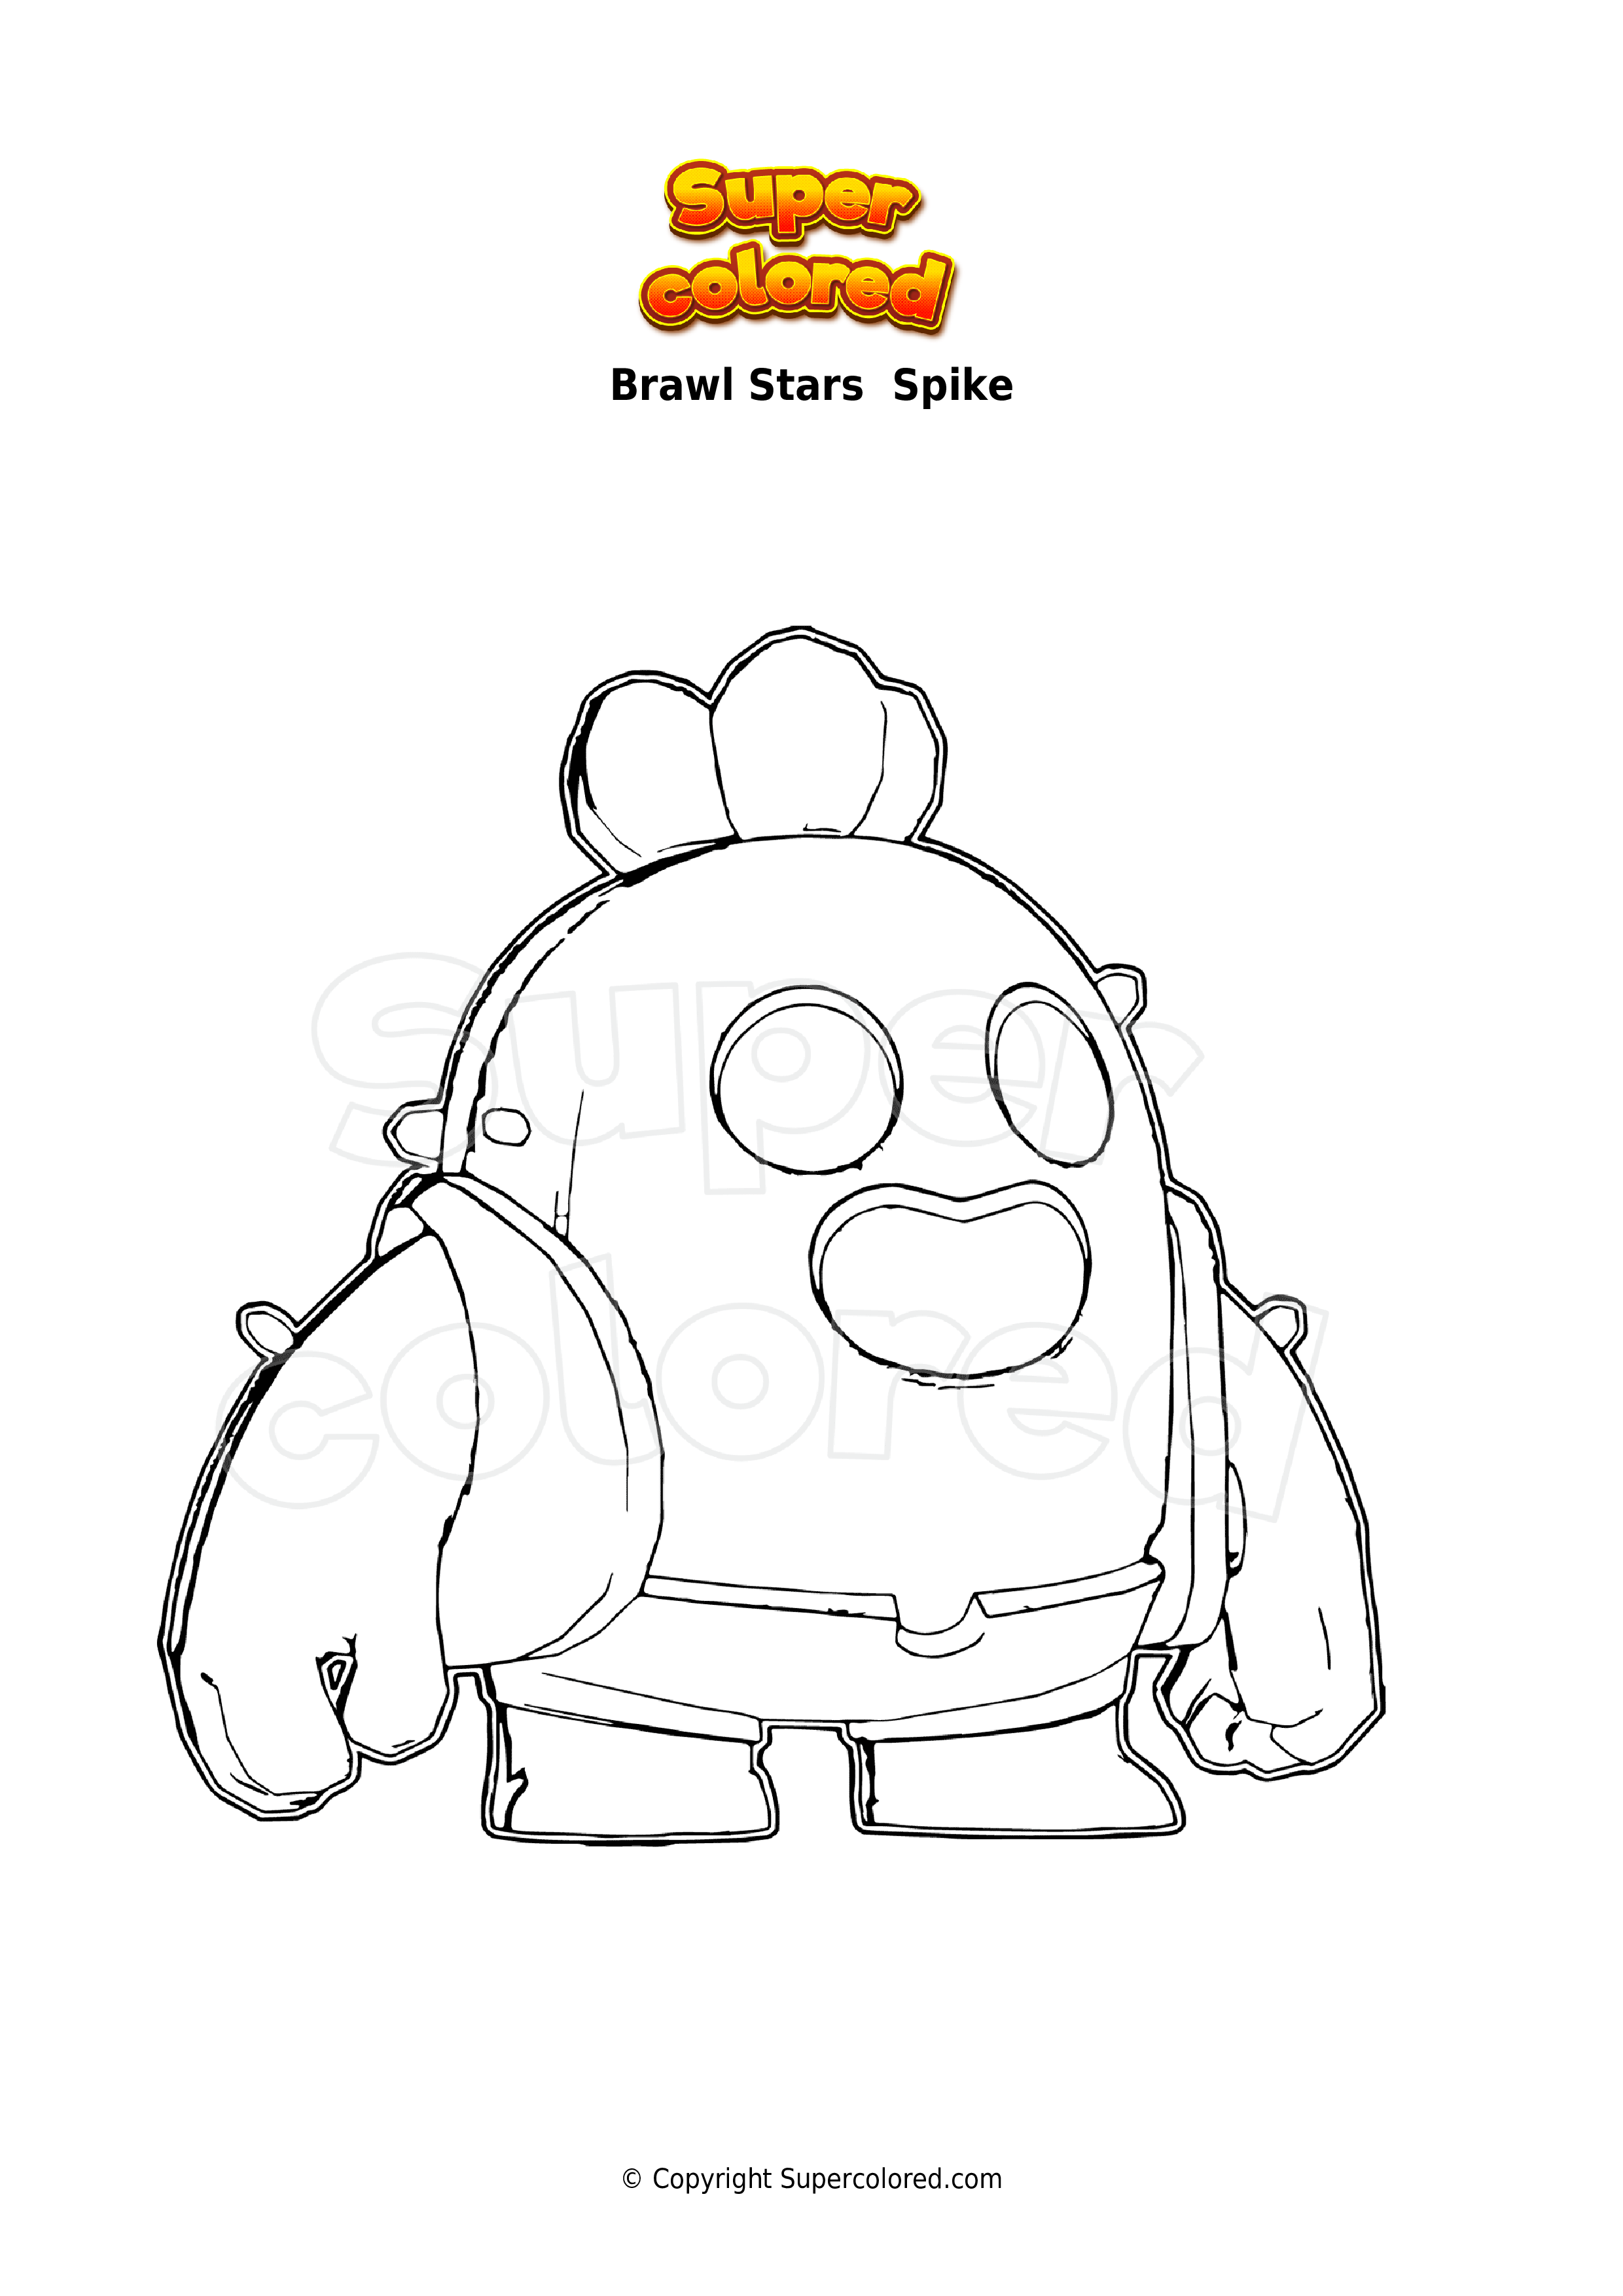 Coloring page Brawl Stars Spike - Supercolored.com